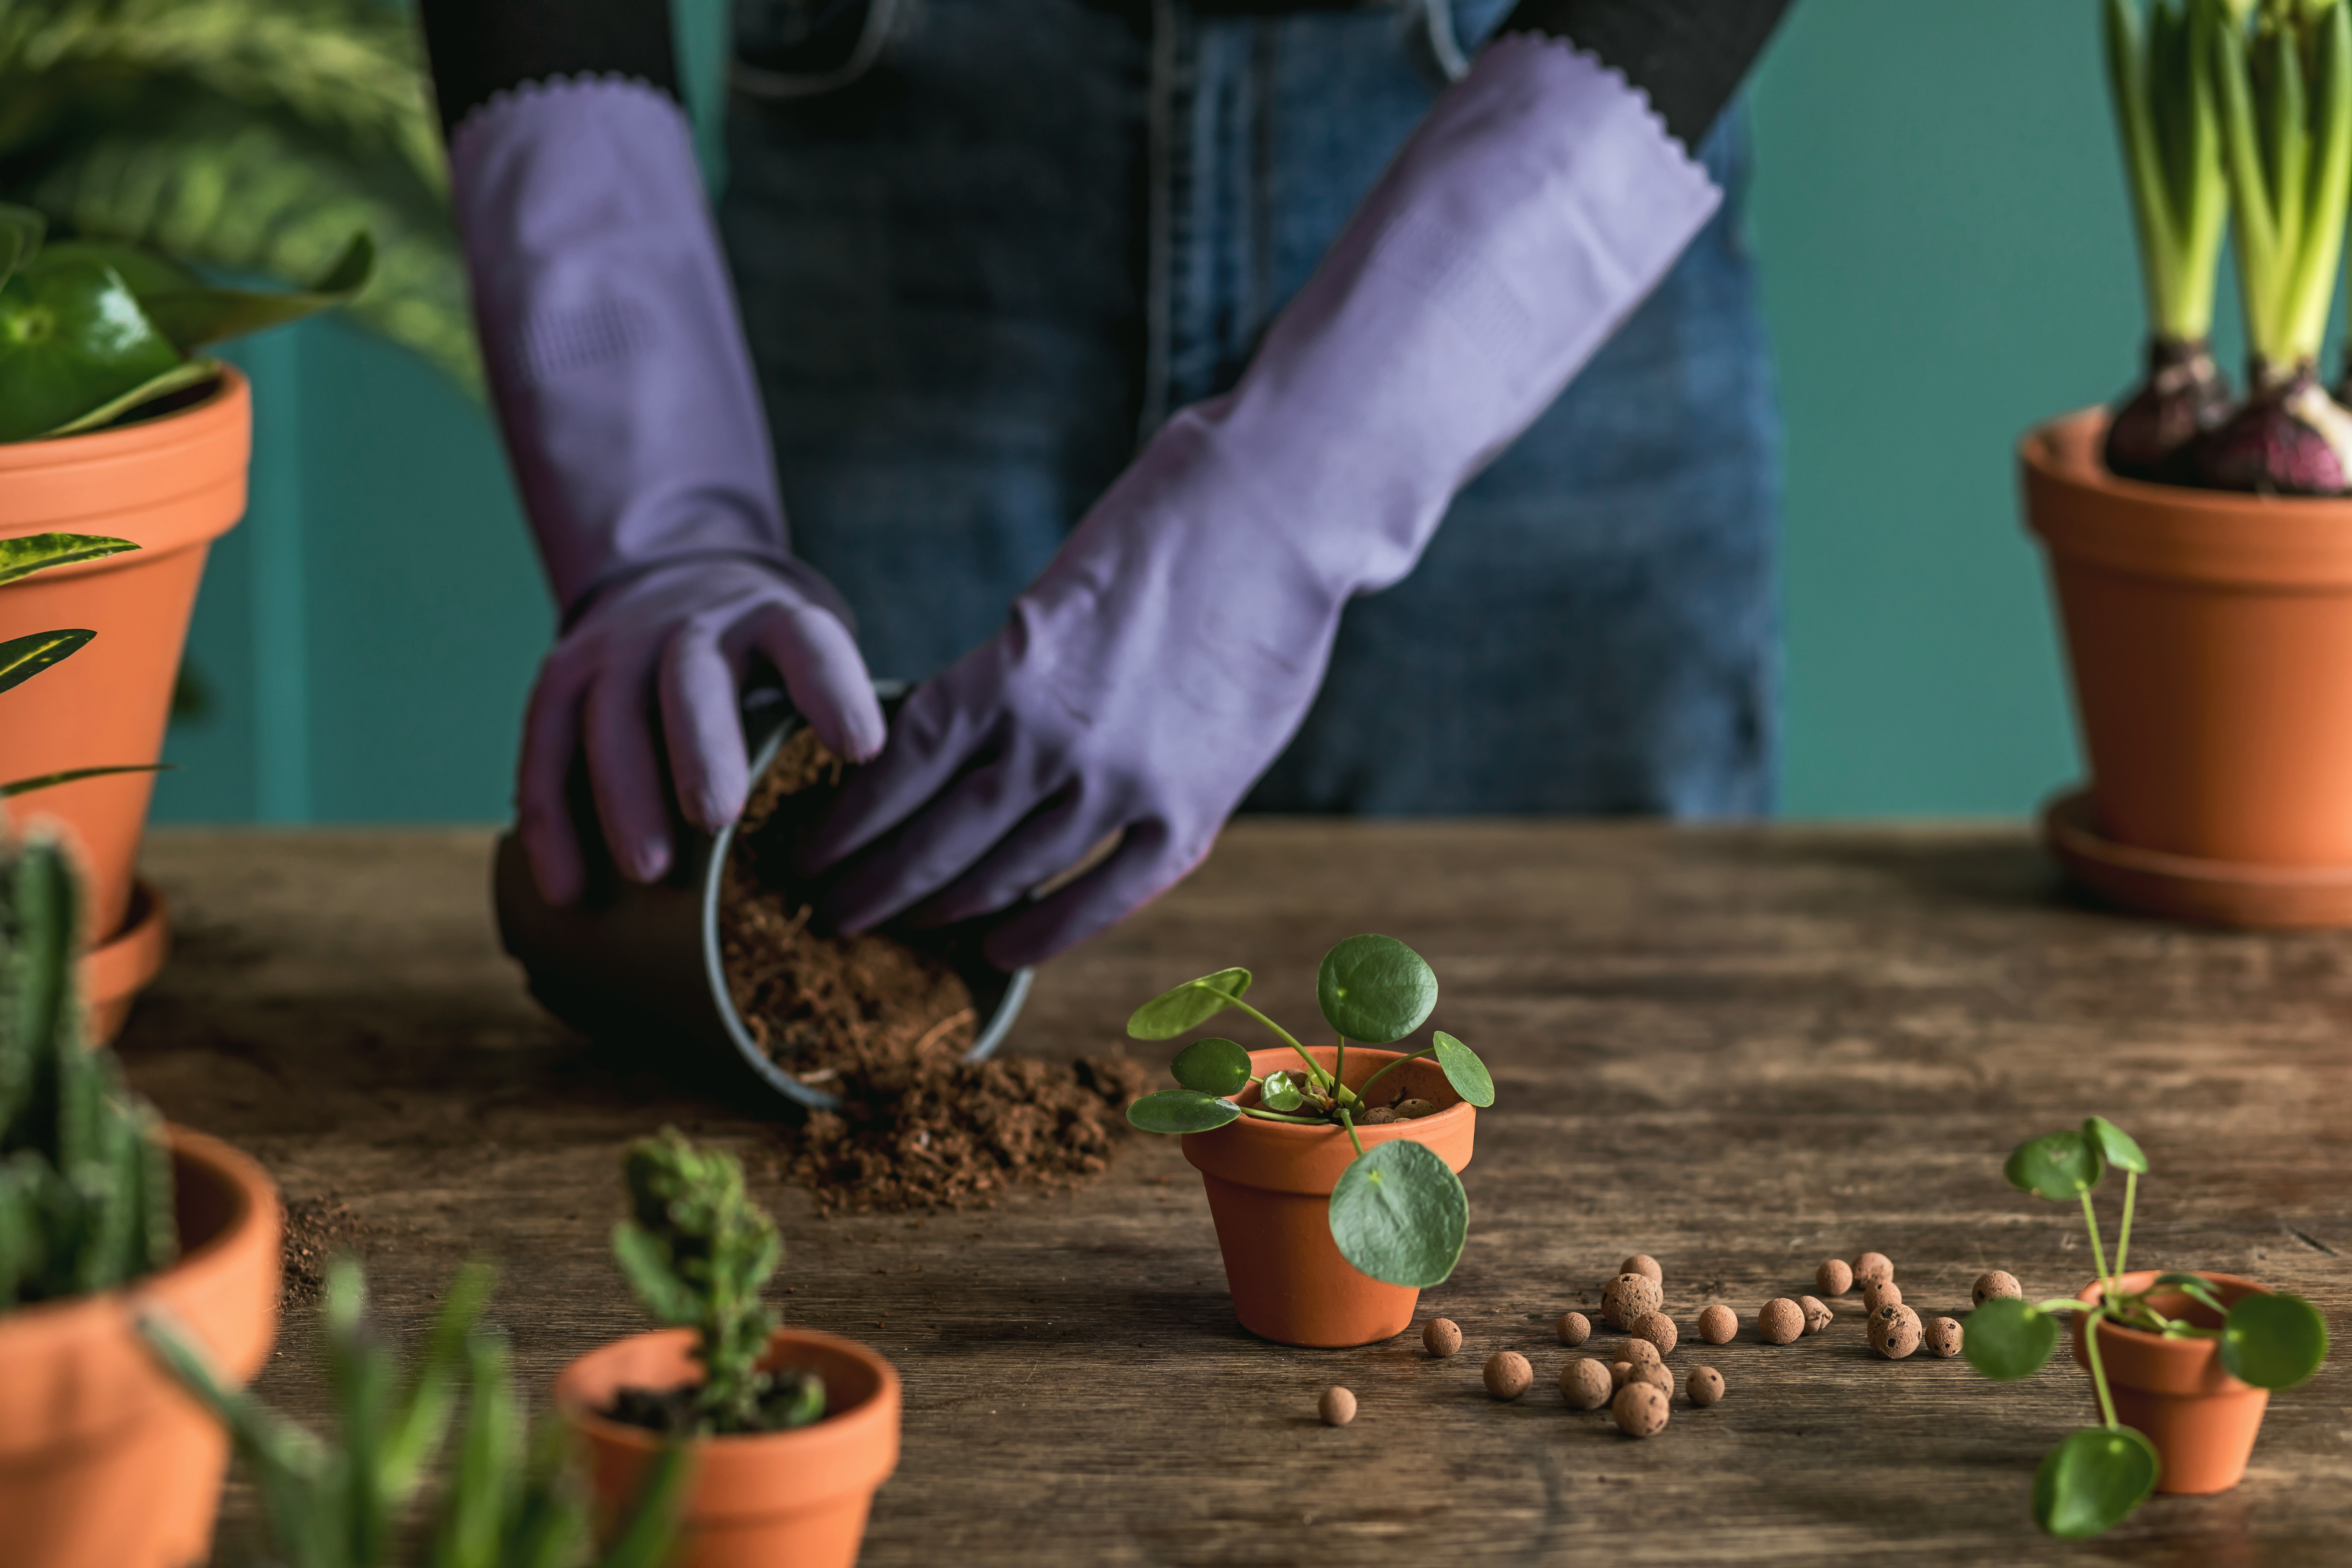 Woman gardeners transplanting plant in ceramic pots on the old wooden table. Concept of home garden. Spring time. Blossom. Stylish interior with a lot of plants. Taking care of home plants. Template.